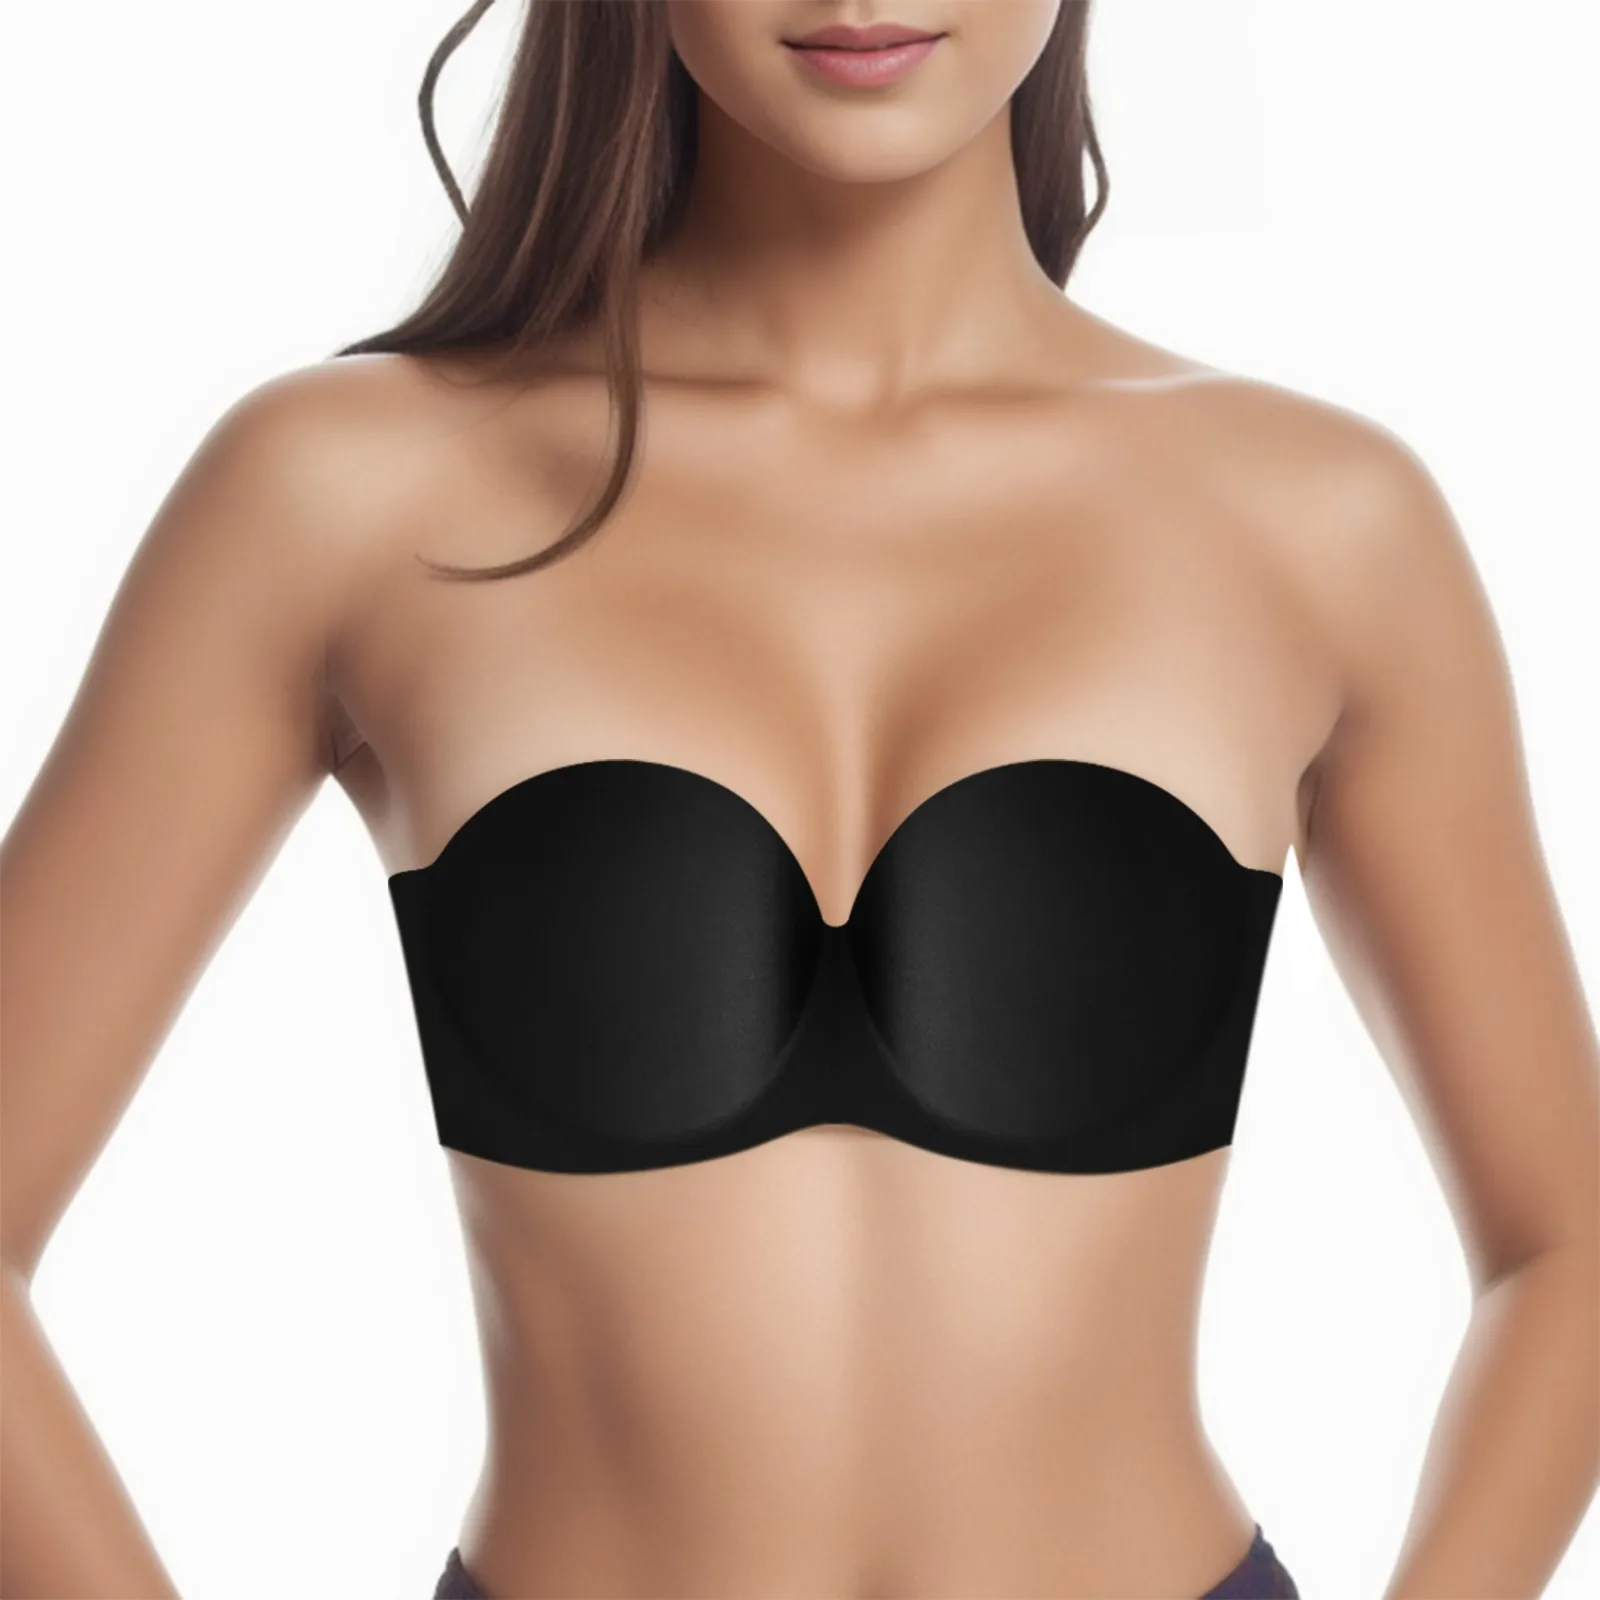 

One-piece Strapless Full Support Non-Slip Back Closure Seamless Underwear Solid Color Black Small Breasts Gathered Push Up Bras